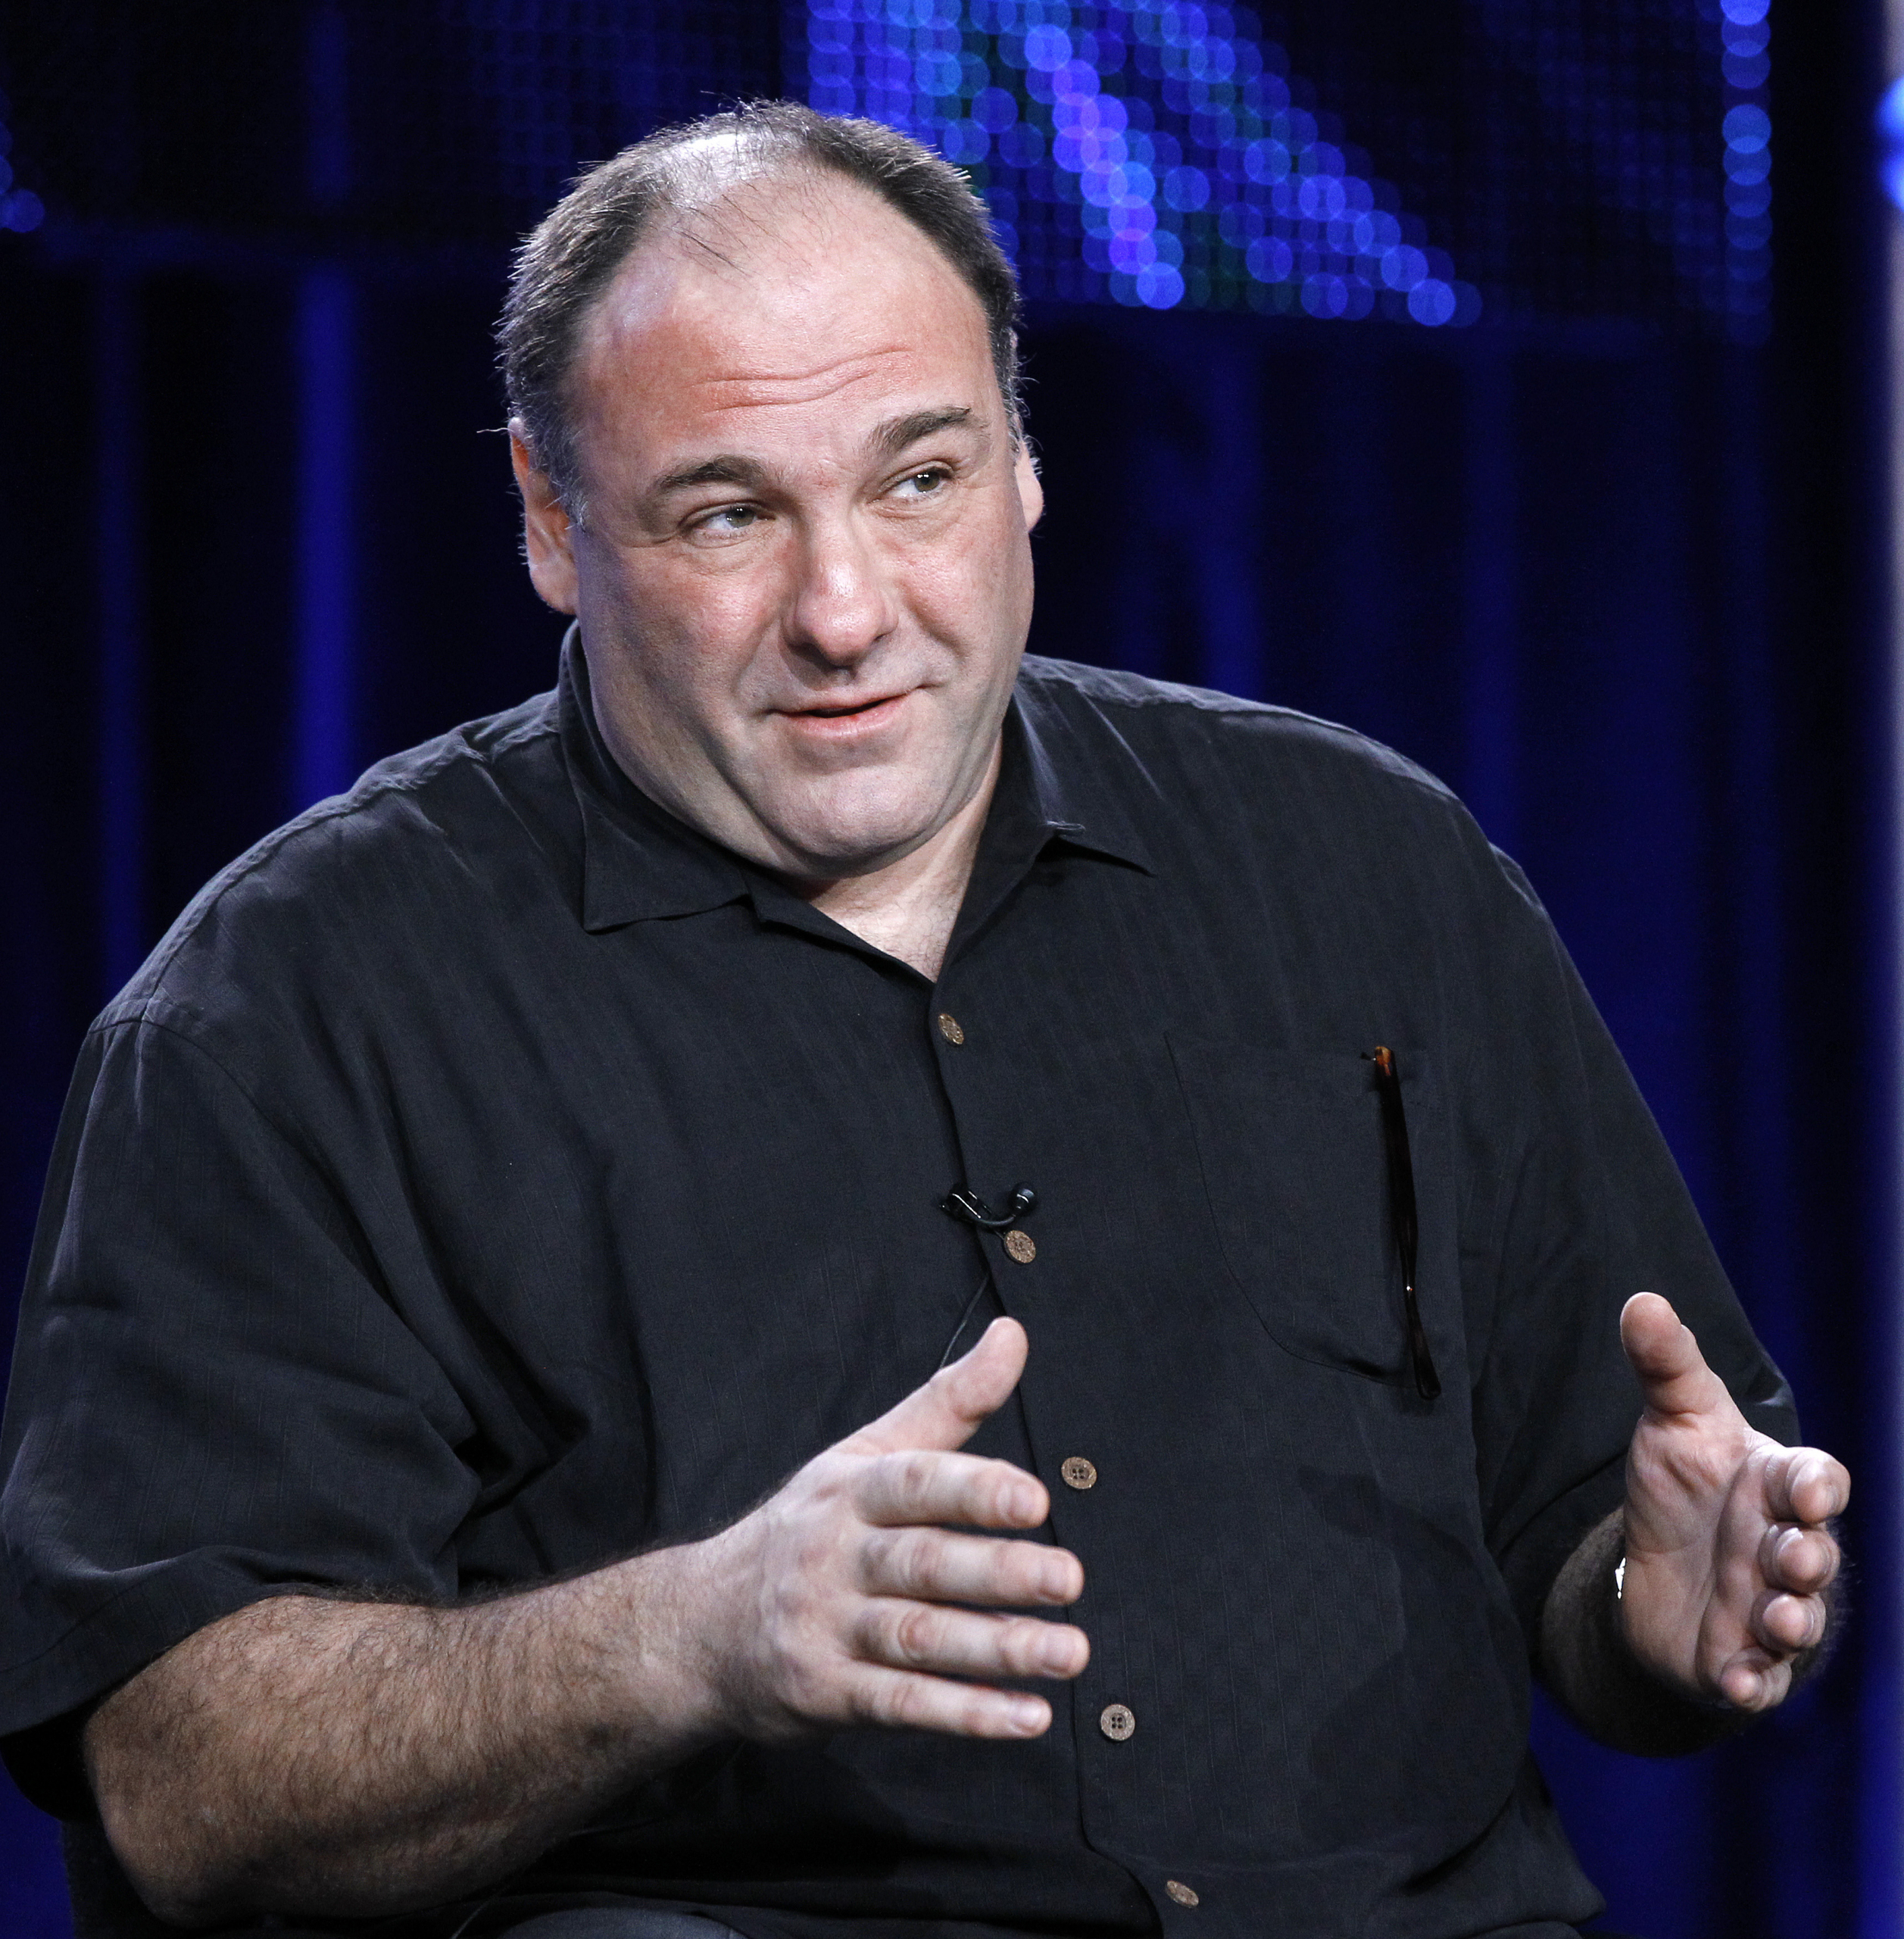 Monday, November 15: Jobs You Can’t Walk Away From; Sopranos Behind The Scenes Stories